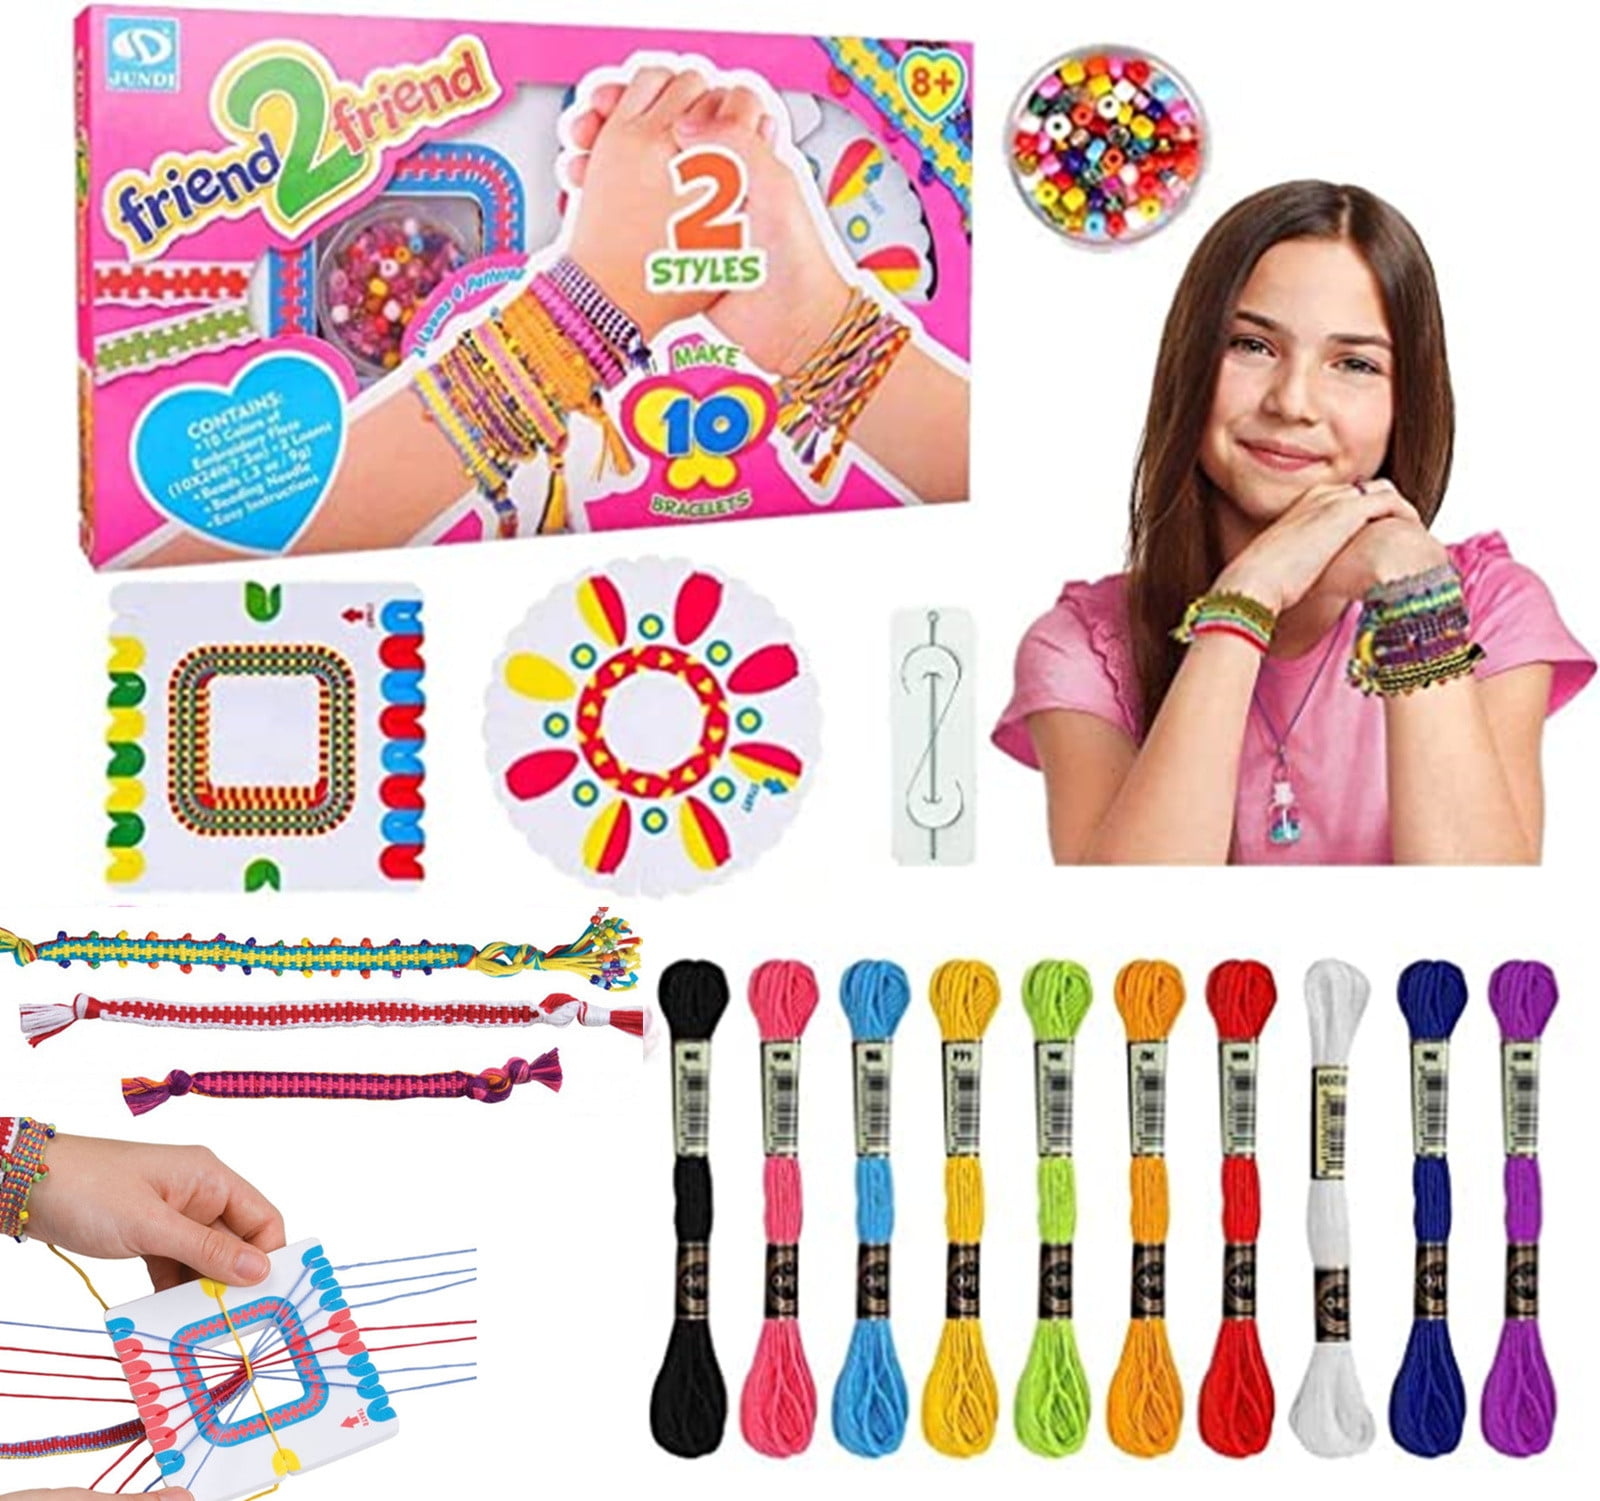 YYNKM Christmas Deals Boy Toys Friendship Bracelet Making Kit For 5-12 Year  Old Girls, Arts And Crafts For Kids - Christmas Or Birthday Gift Toy Gifts  Toddler Fidget Toys on Clearance Deals 